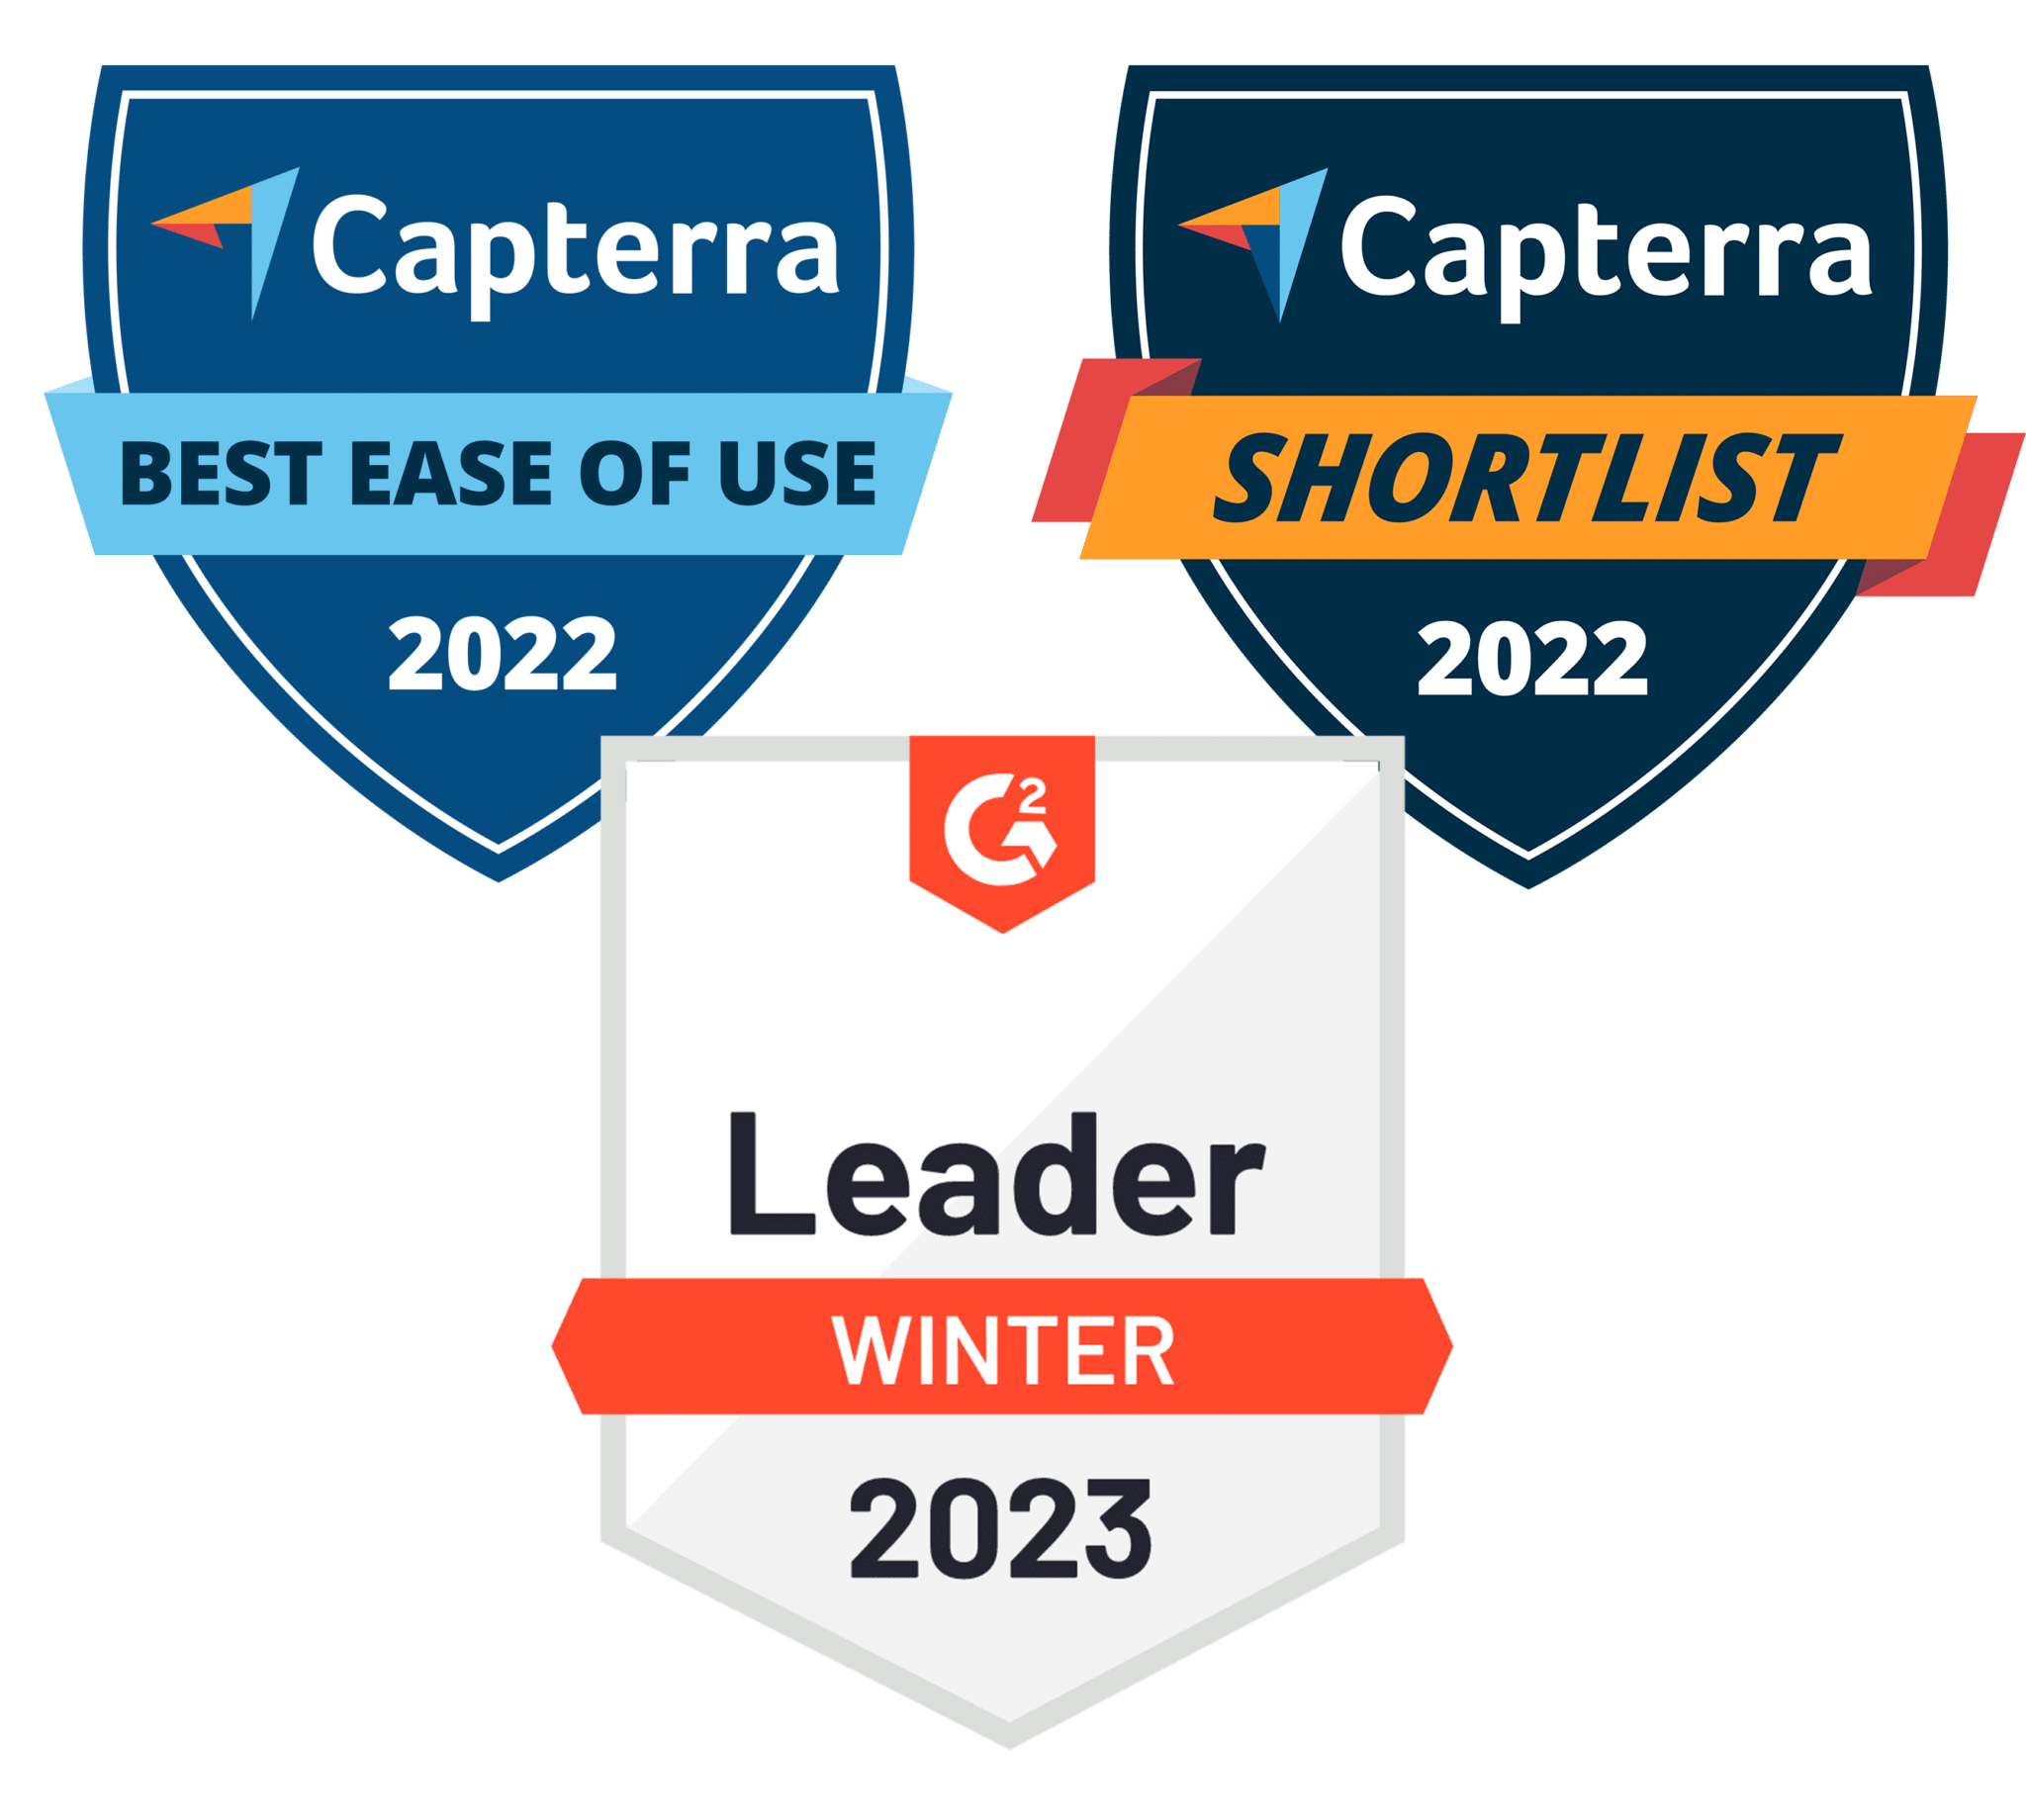 MyCase legal software’s Capterra and G2 awards